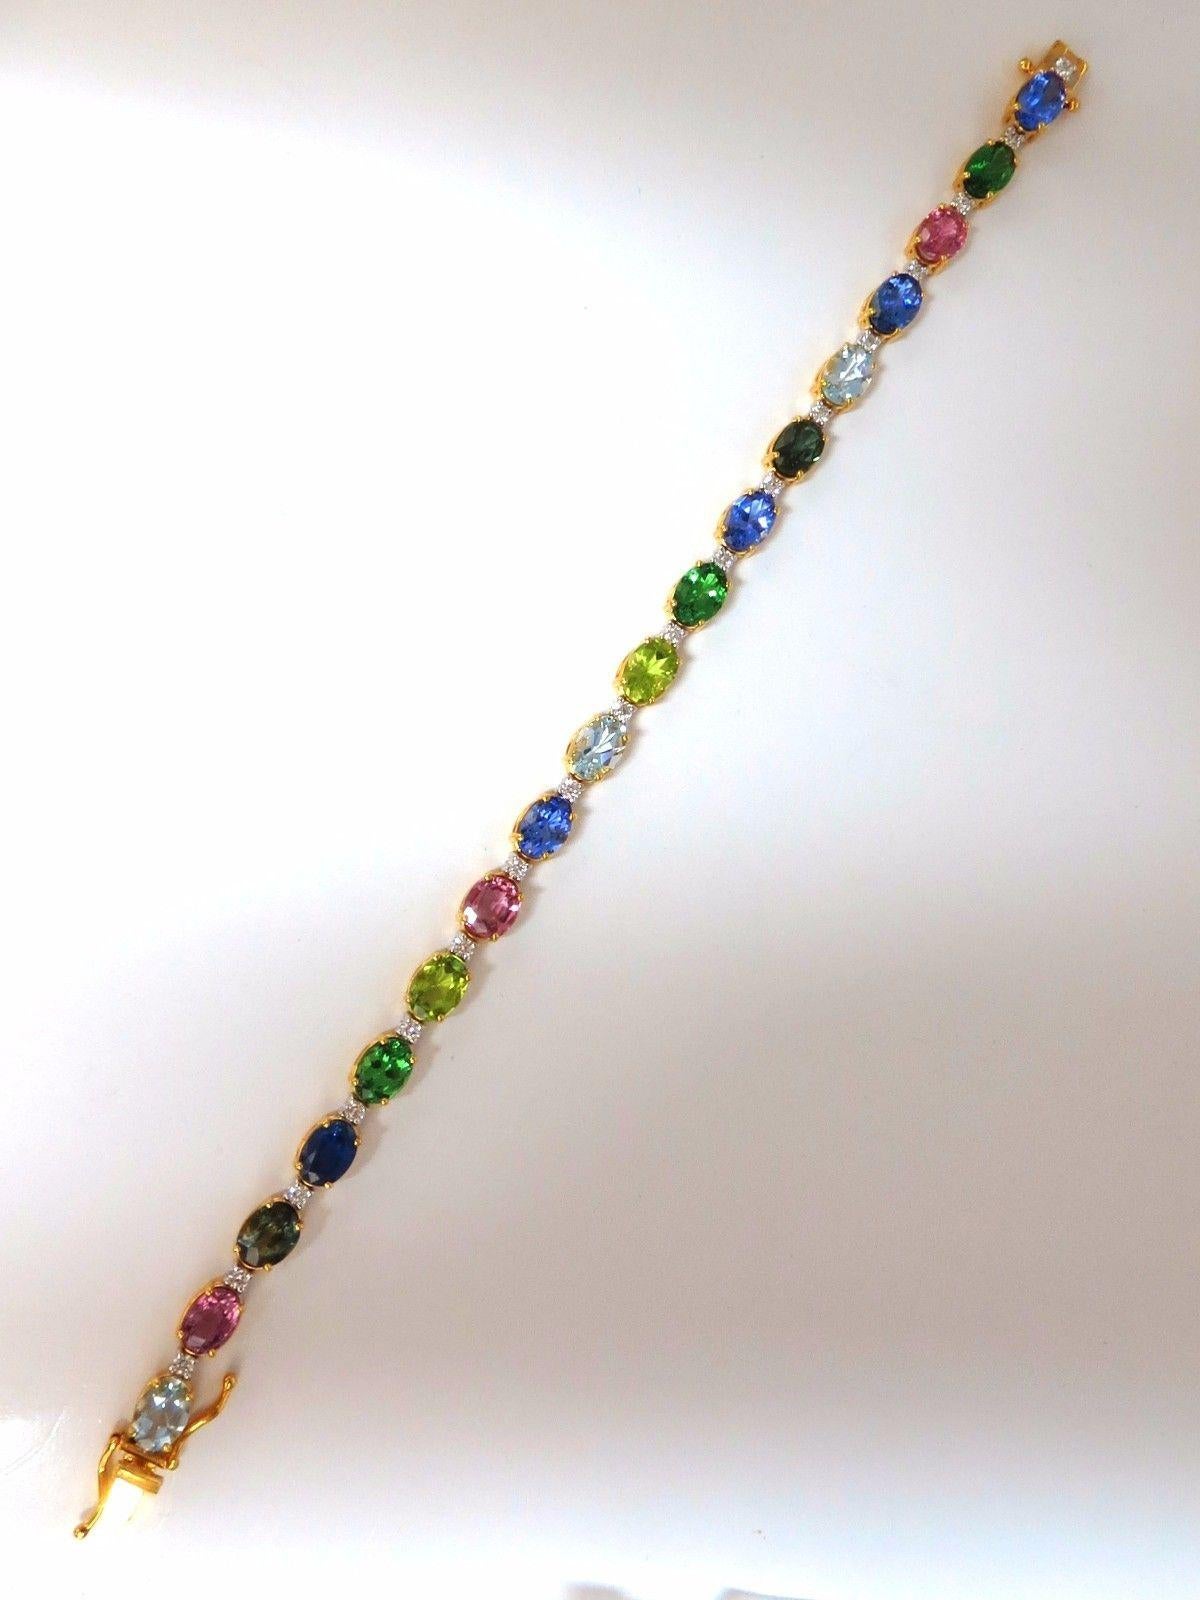 Spring Color Palette.

14.52ct. Natural Tsavorites, Spinels, Tanzanite,

Aquamarine, sapphires & .65ct Diamonds bracelet.

Full oval cuts, great sparkle.

Vibrant Greens, Orange, Reds, yellows, Blues and Pinks

Clean Clarity &